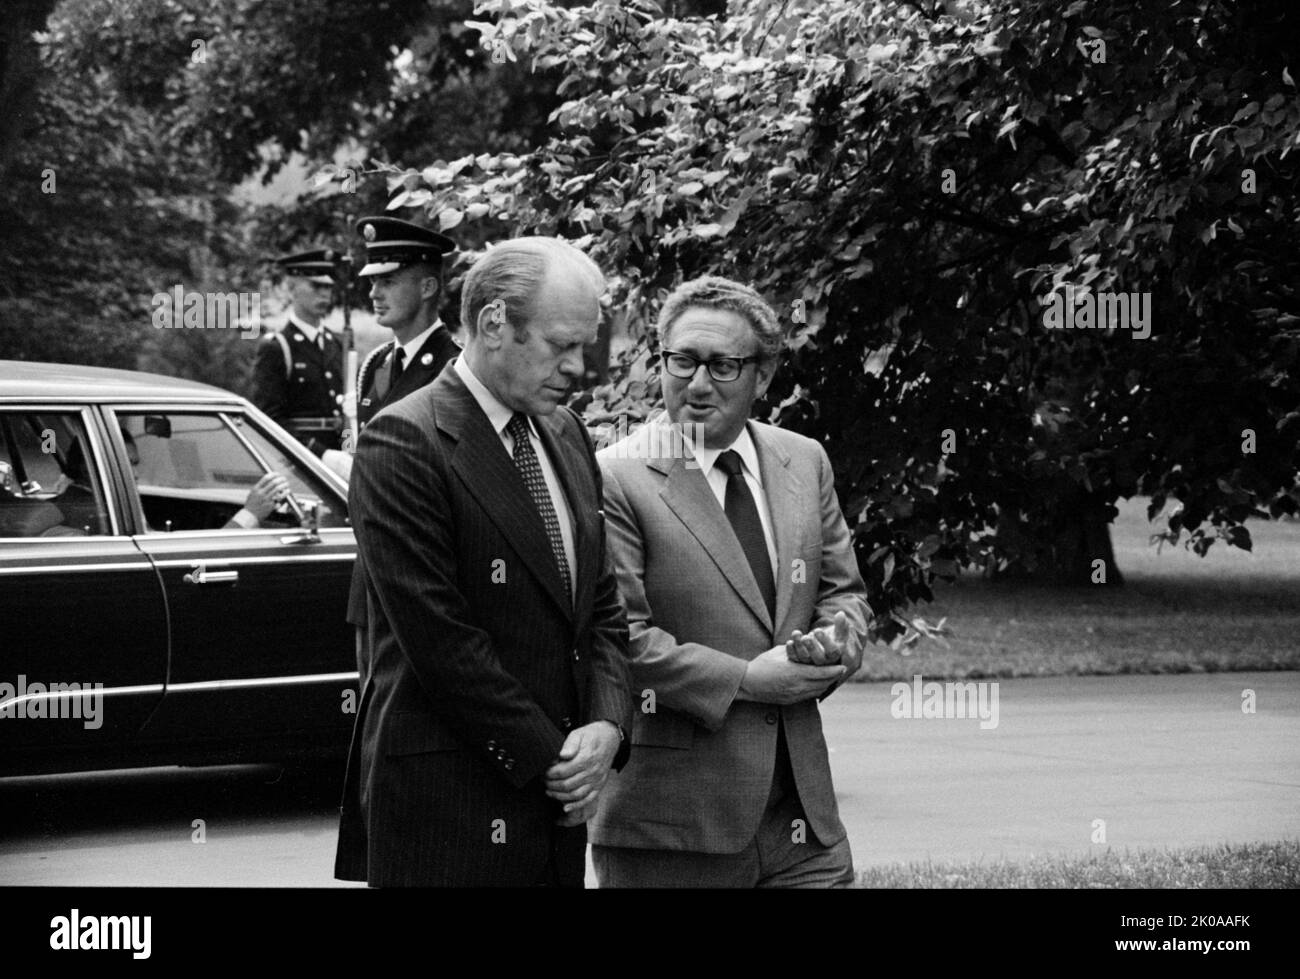 President Gerald Ford and U.S. Secretary of State Henry Kissinger, conversing, on the grounds of the White House, Washington, D.C. 1974 Stock Photo